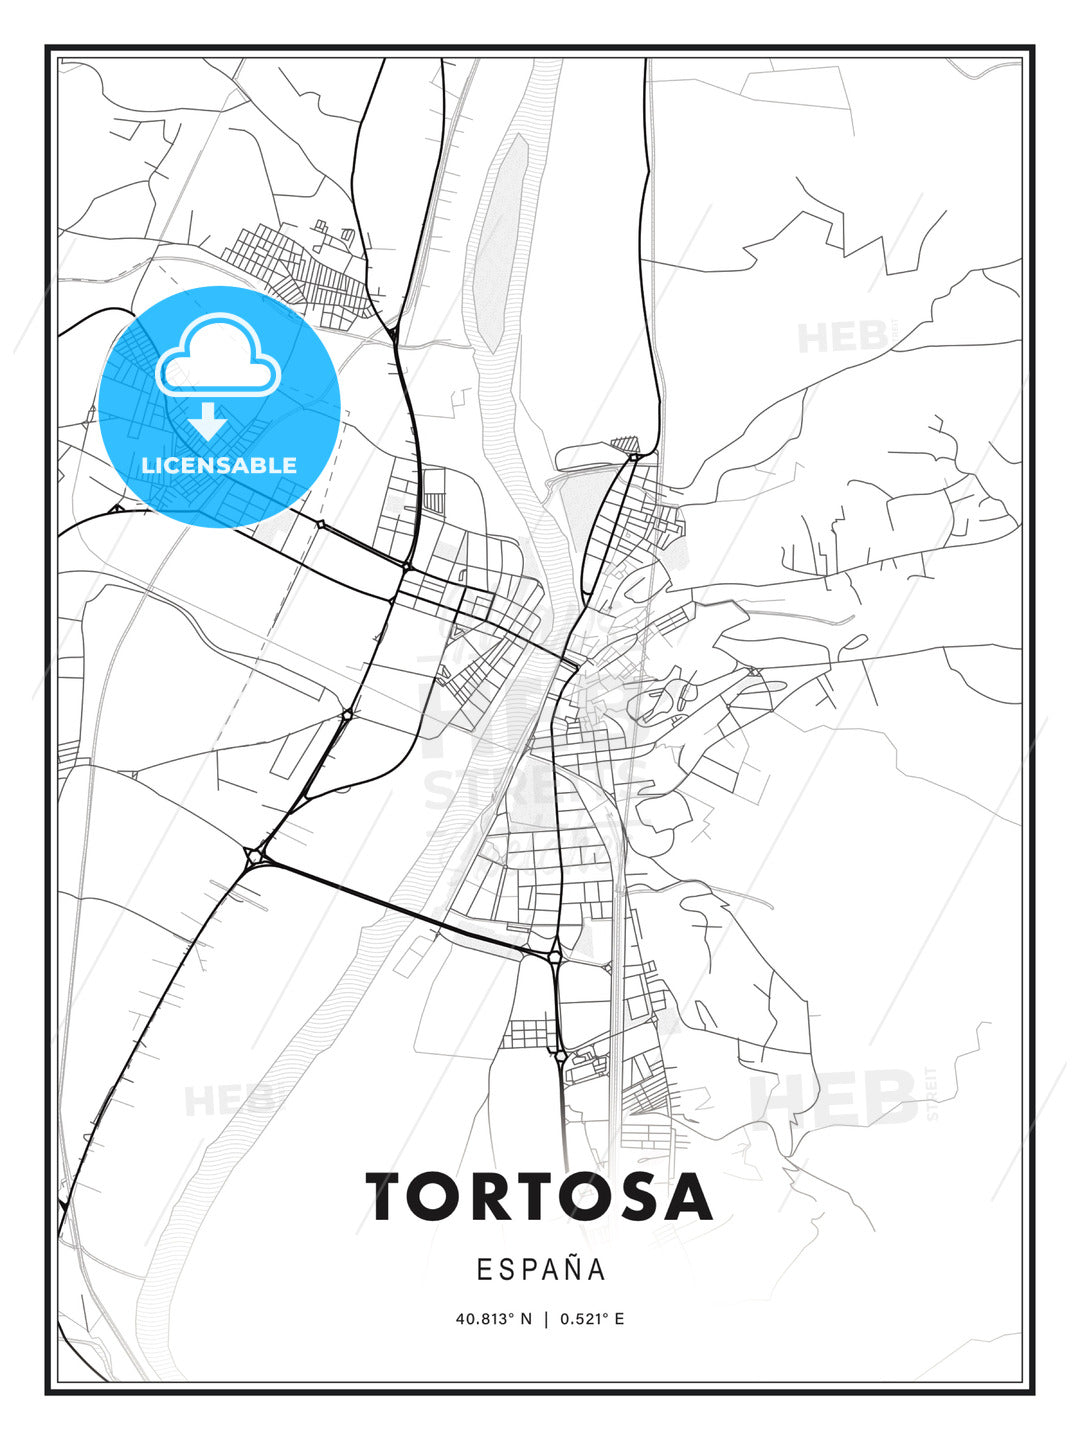 Tortosa, Spain, Modern Print Template in Various Formats - HEBSTREITS Sketches